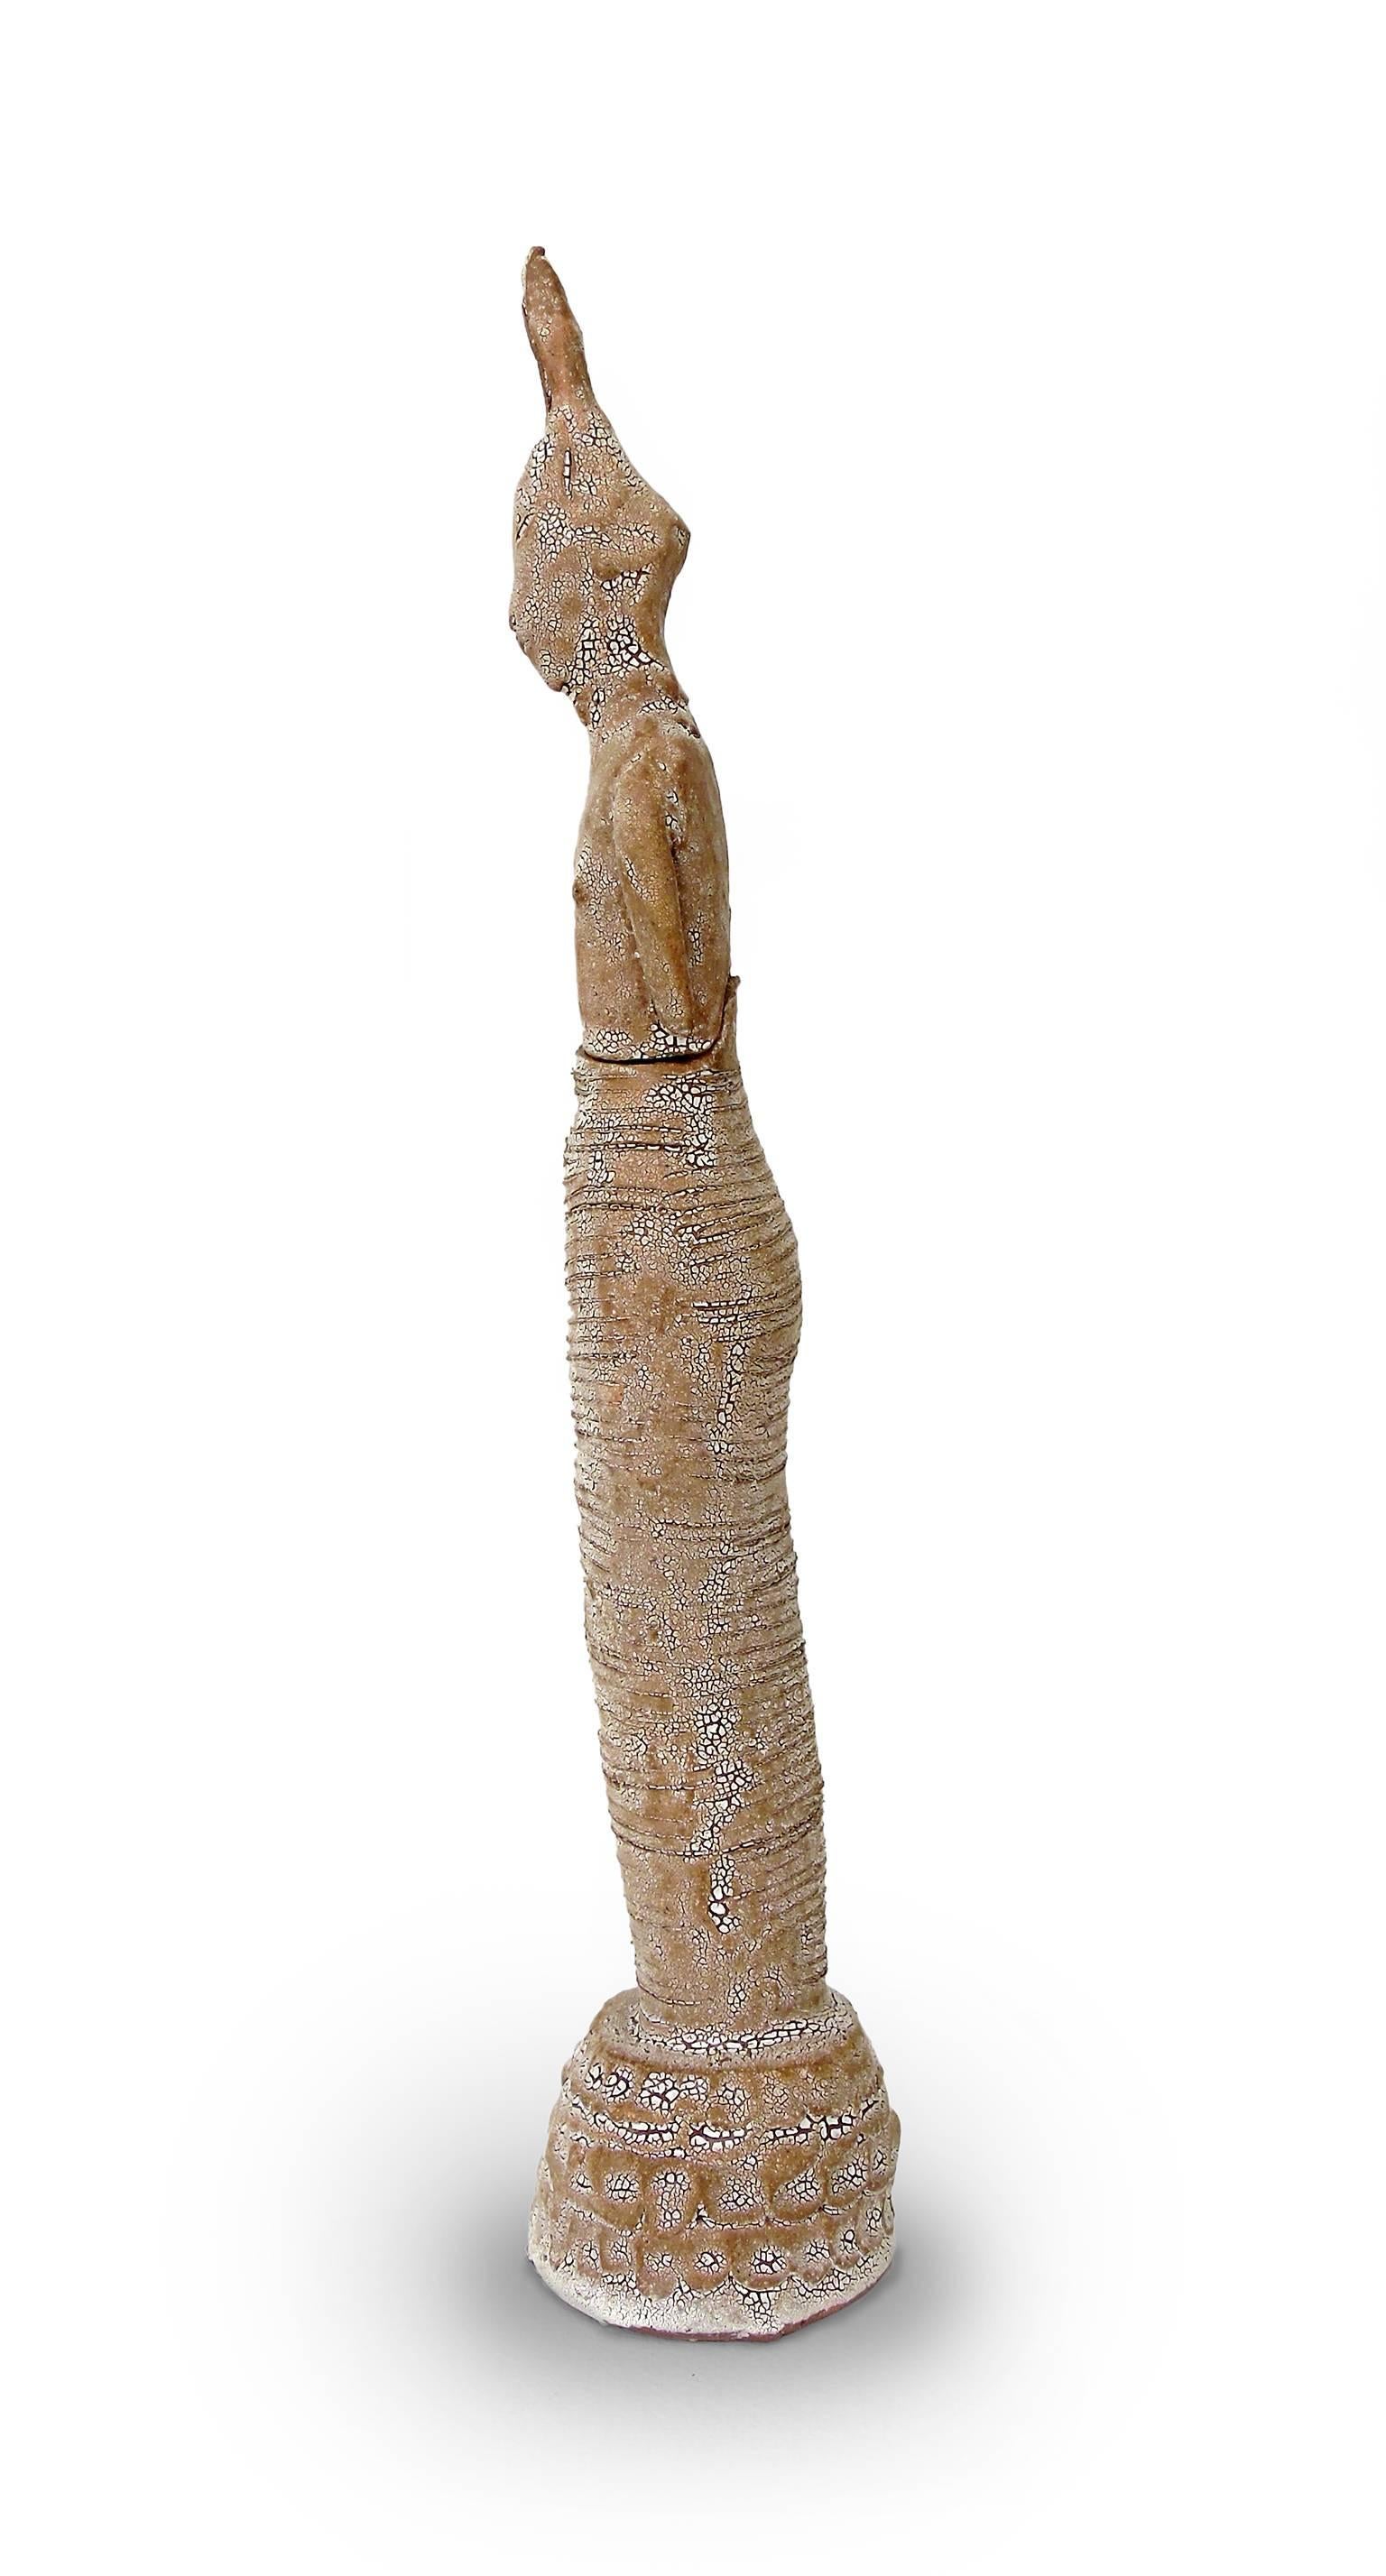 Robin Whiteman is better known for her intricately rendered porcelain creations. This terracotta piece with its crackled glaze is an example of Whiteman working in a looser, more stylized manner. 'Covered Jar - Hare' is a vertical figure at once